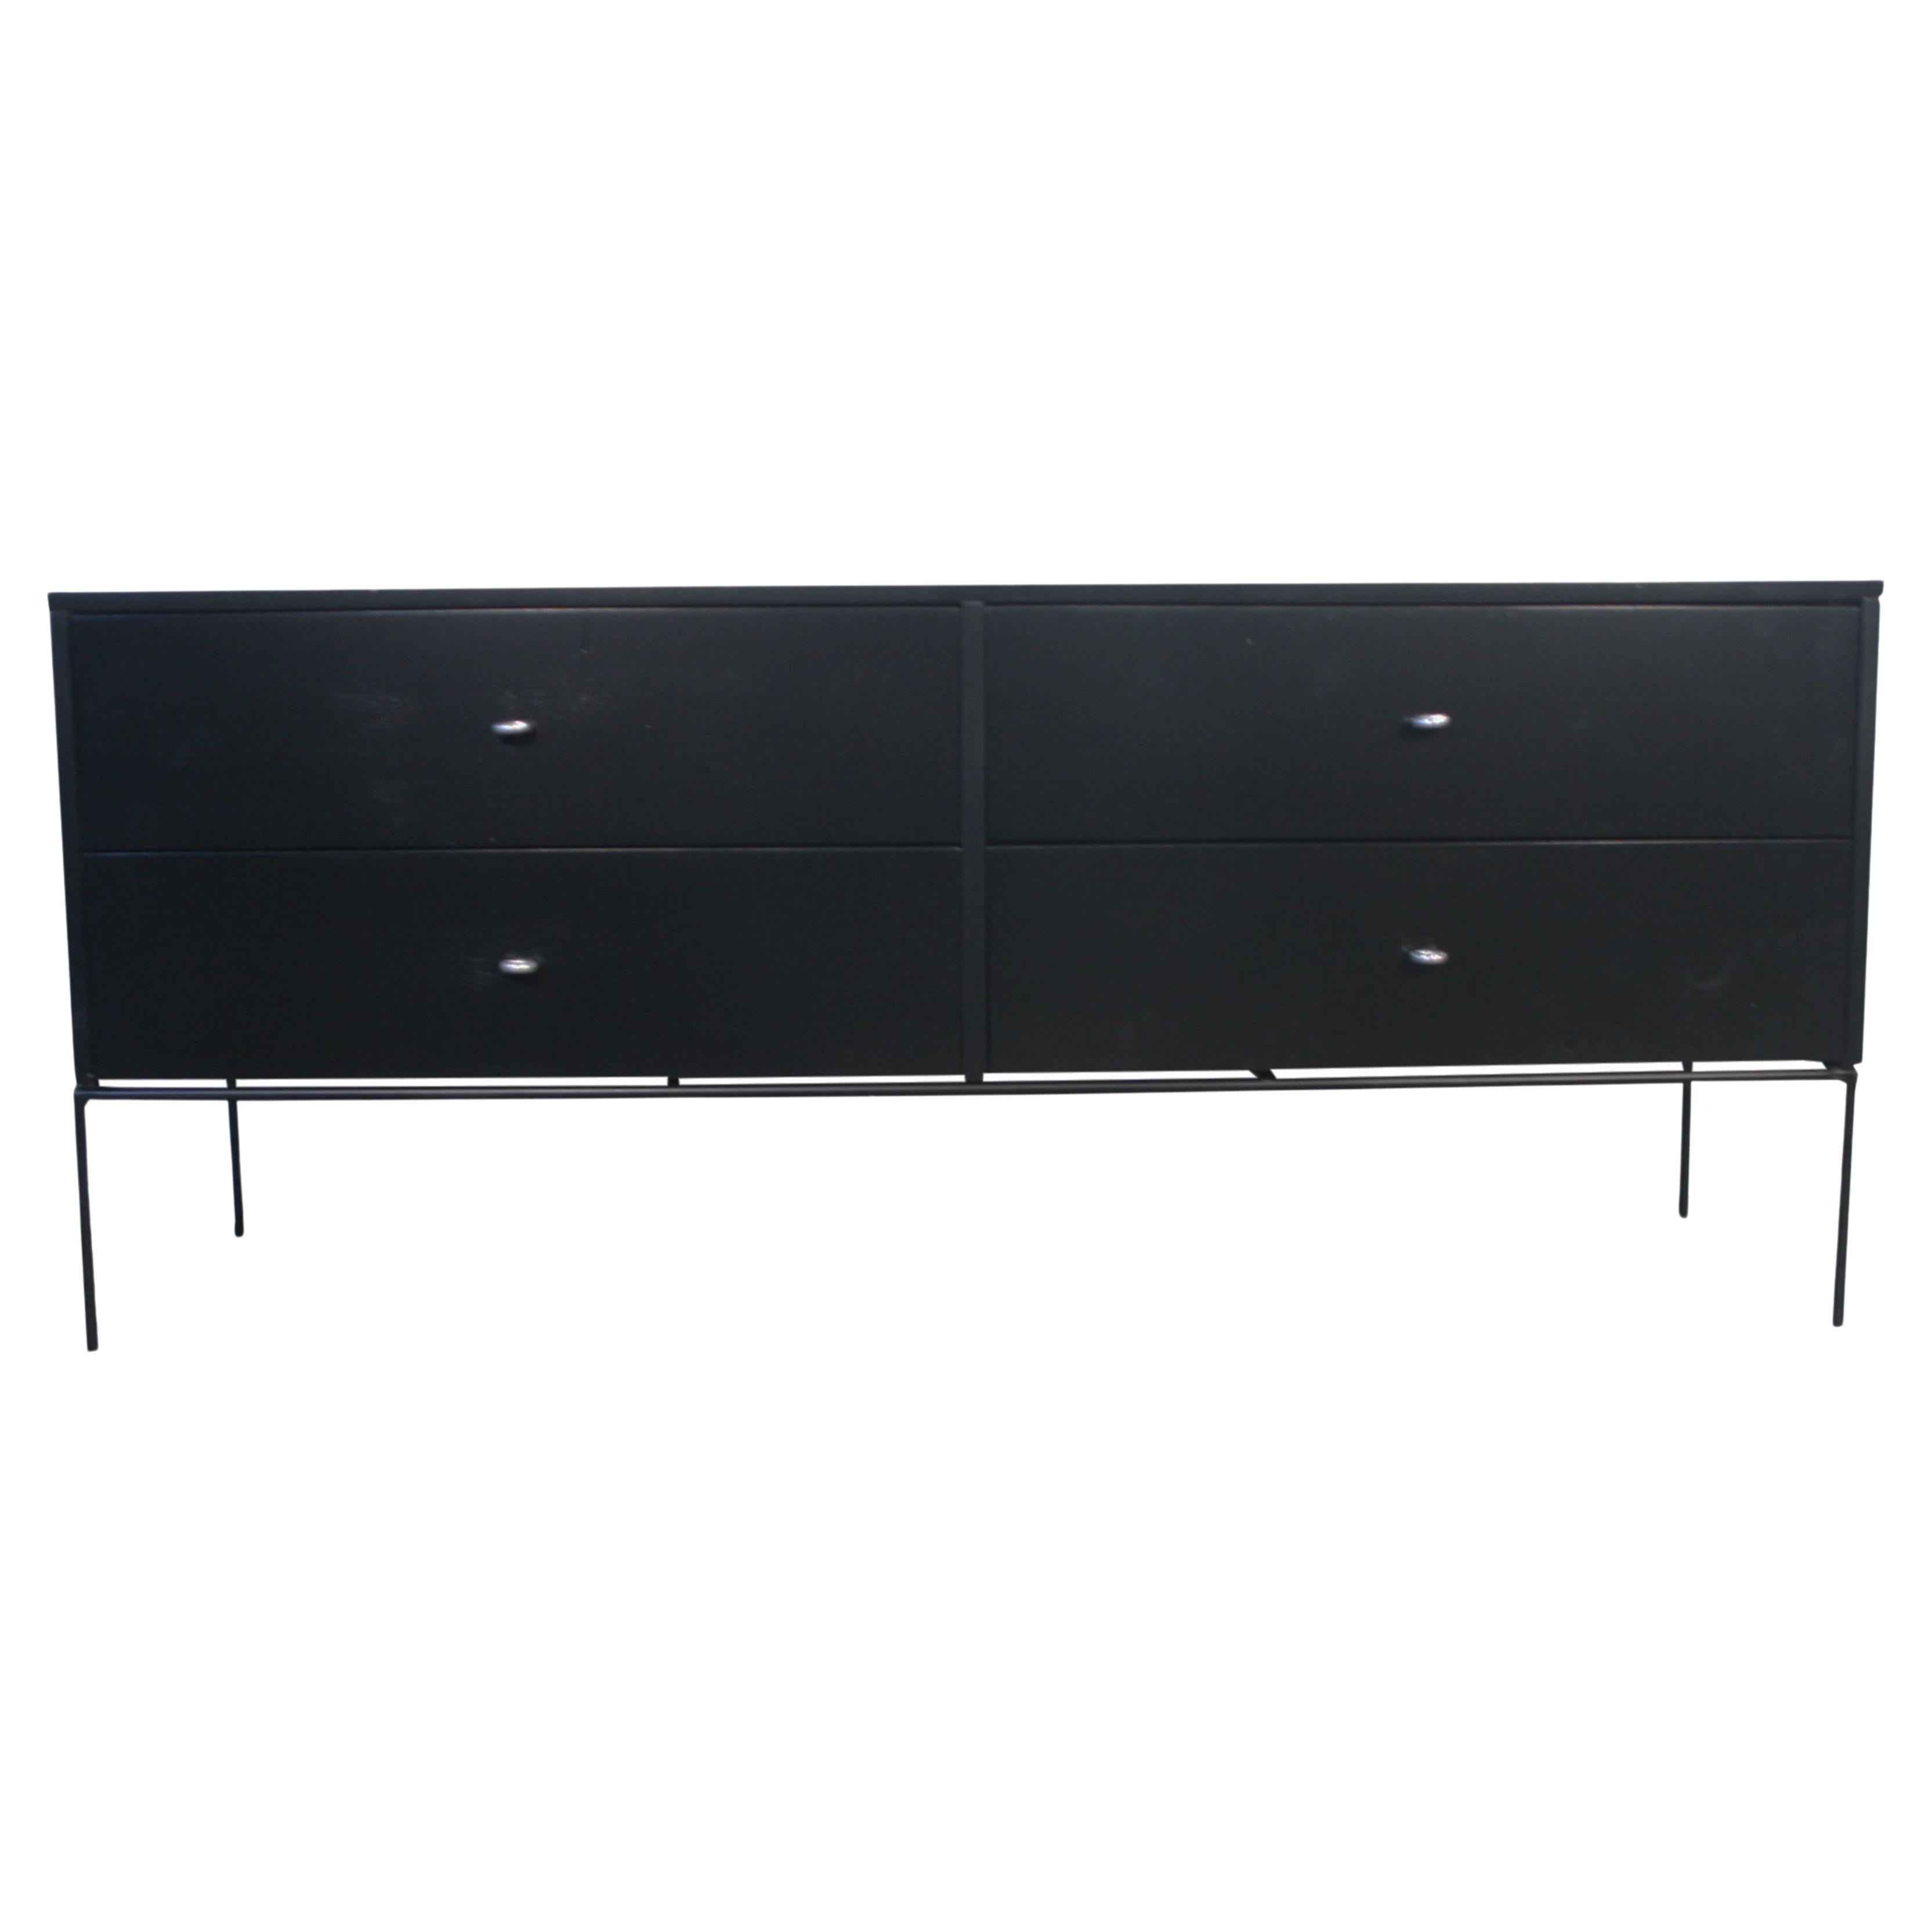 Beautiful mid century low dresser credenza by Paul McCobb circa 1950 Planner Group #1504 with 4 drawers - solid maple construction has a Black Lacquered finish. All original aluminum ring pulls sits on an iron Base with 4 legs. Refinished in Black